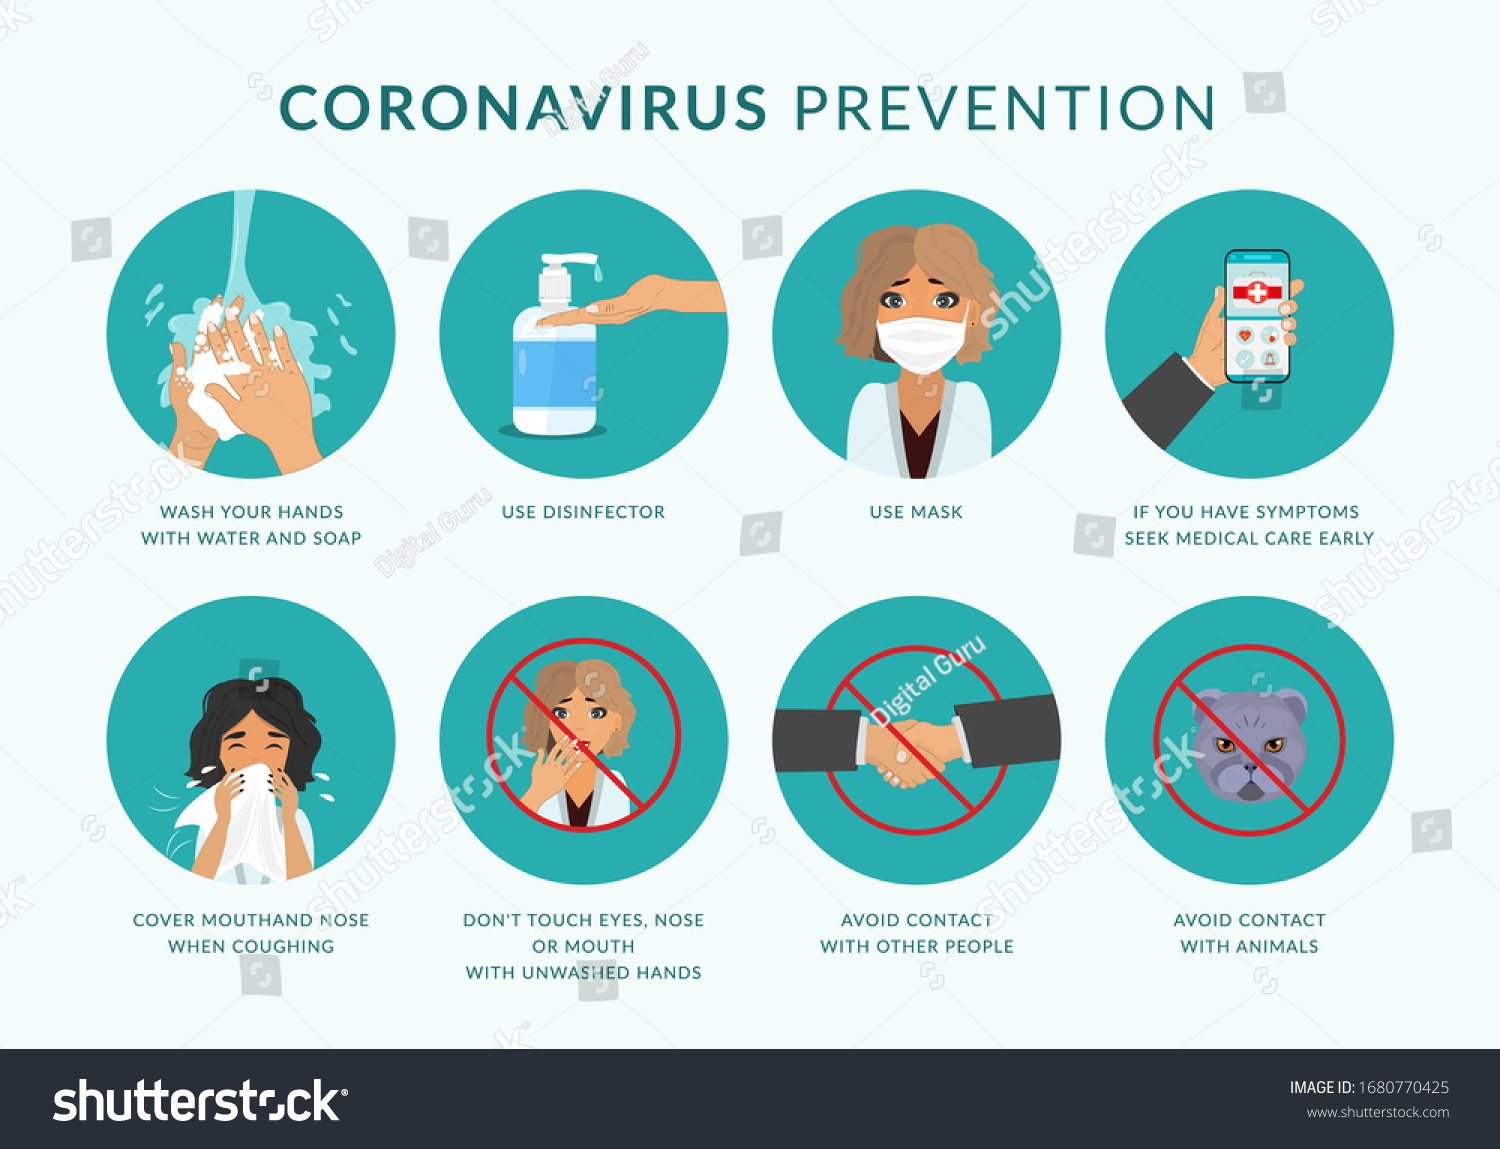 How to protect yourself from coronavirus